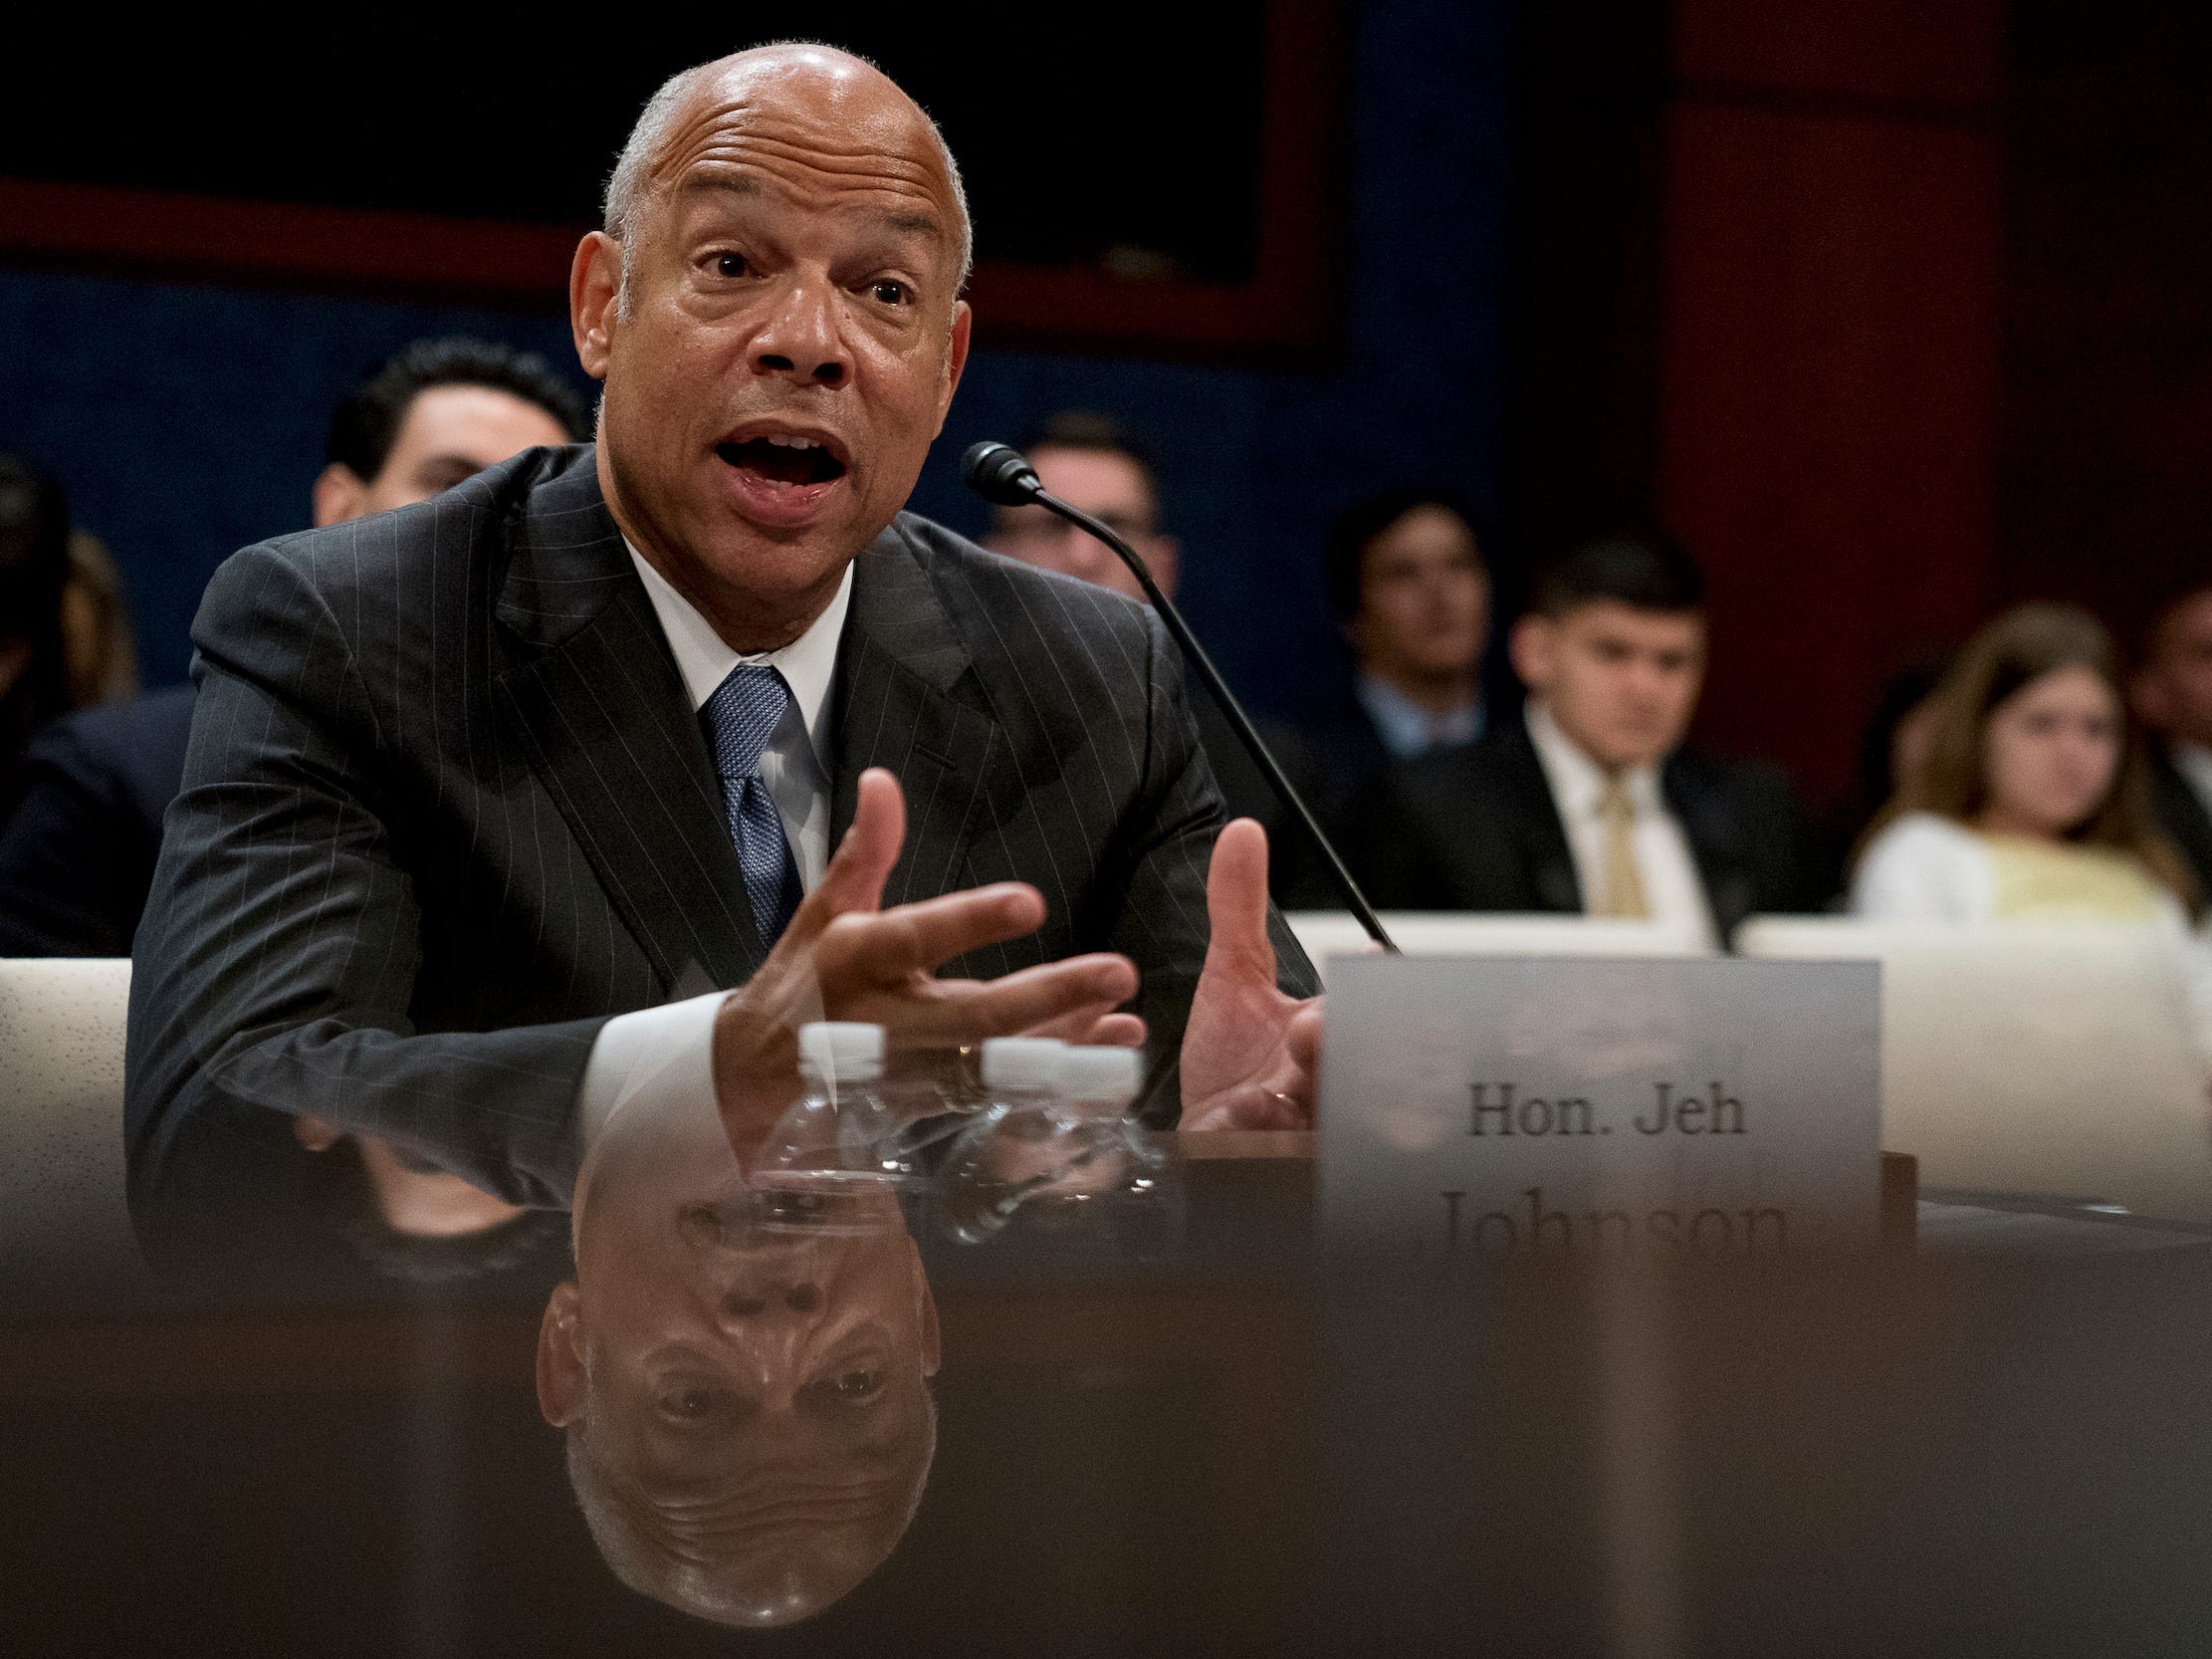 Jeh Johnson testifies to the House Intelligence Committee in Washington on June 21, 2017 as part of the Russia investigation